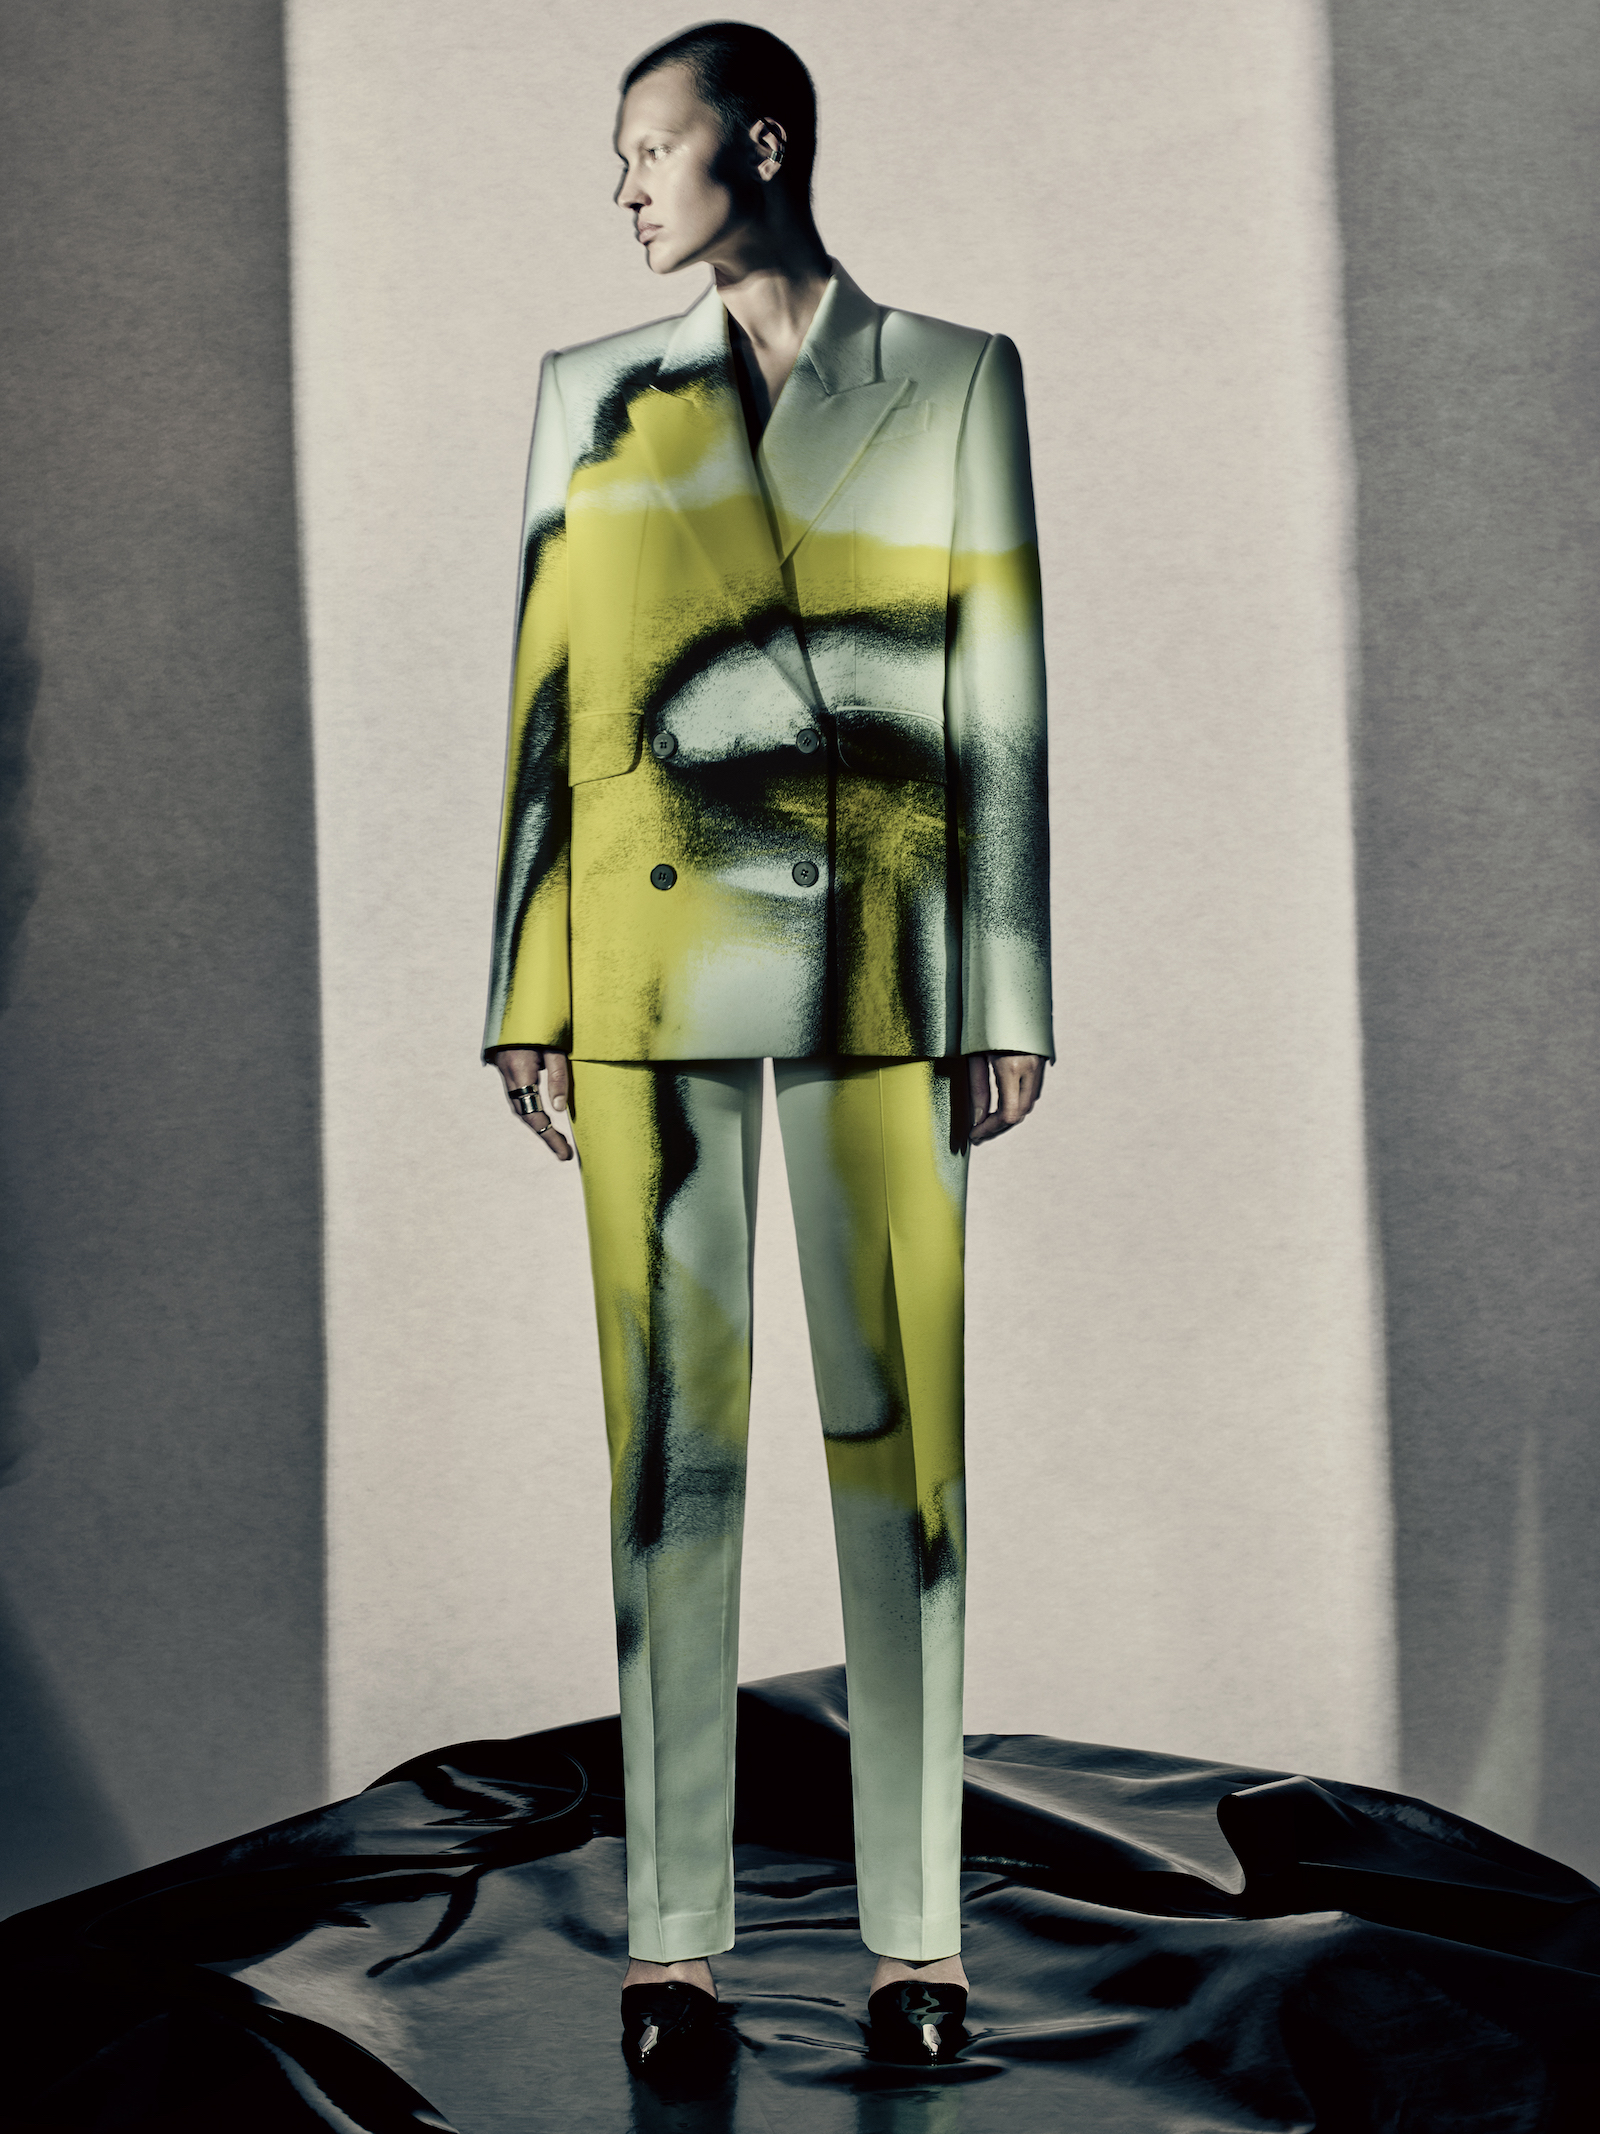  Celina wears bright yellow and black spore print double-breasted tailored jacket and cigarette trousers, photographed by Paolo Roversi.